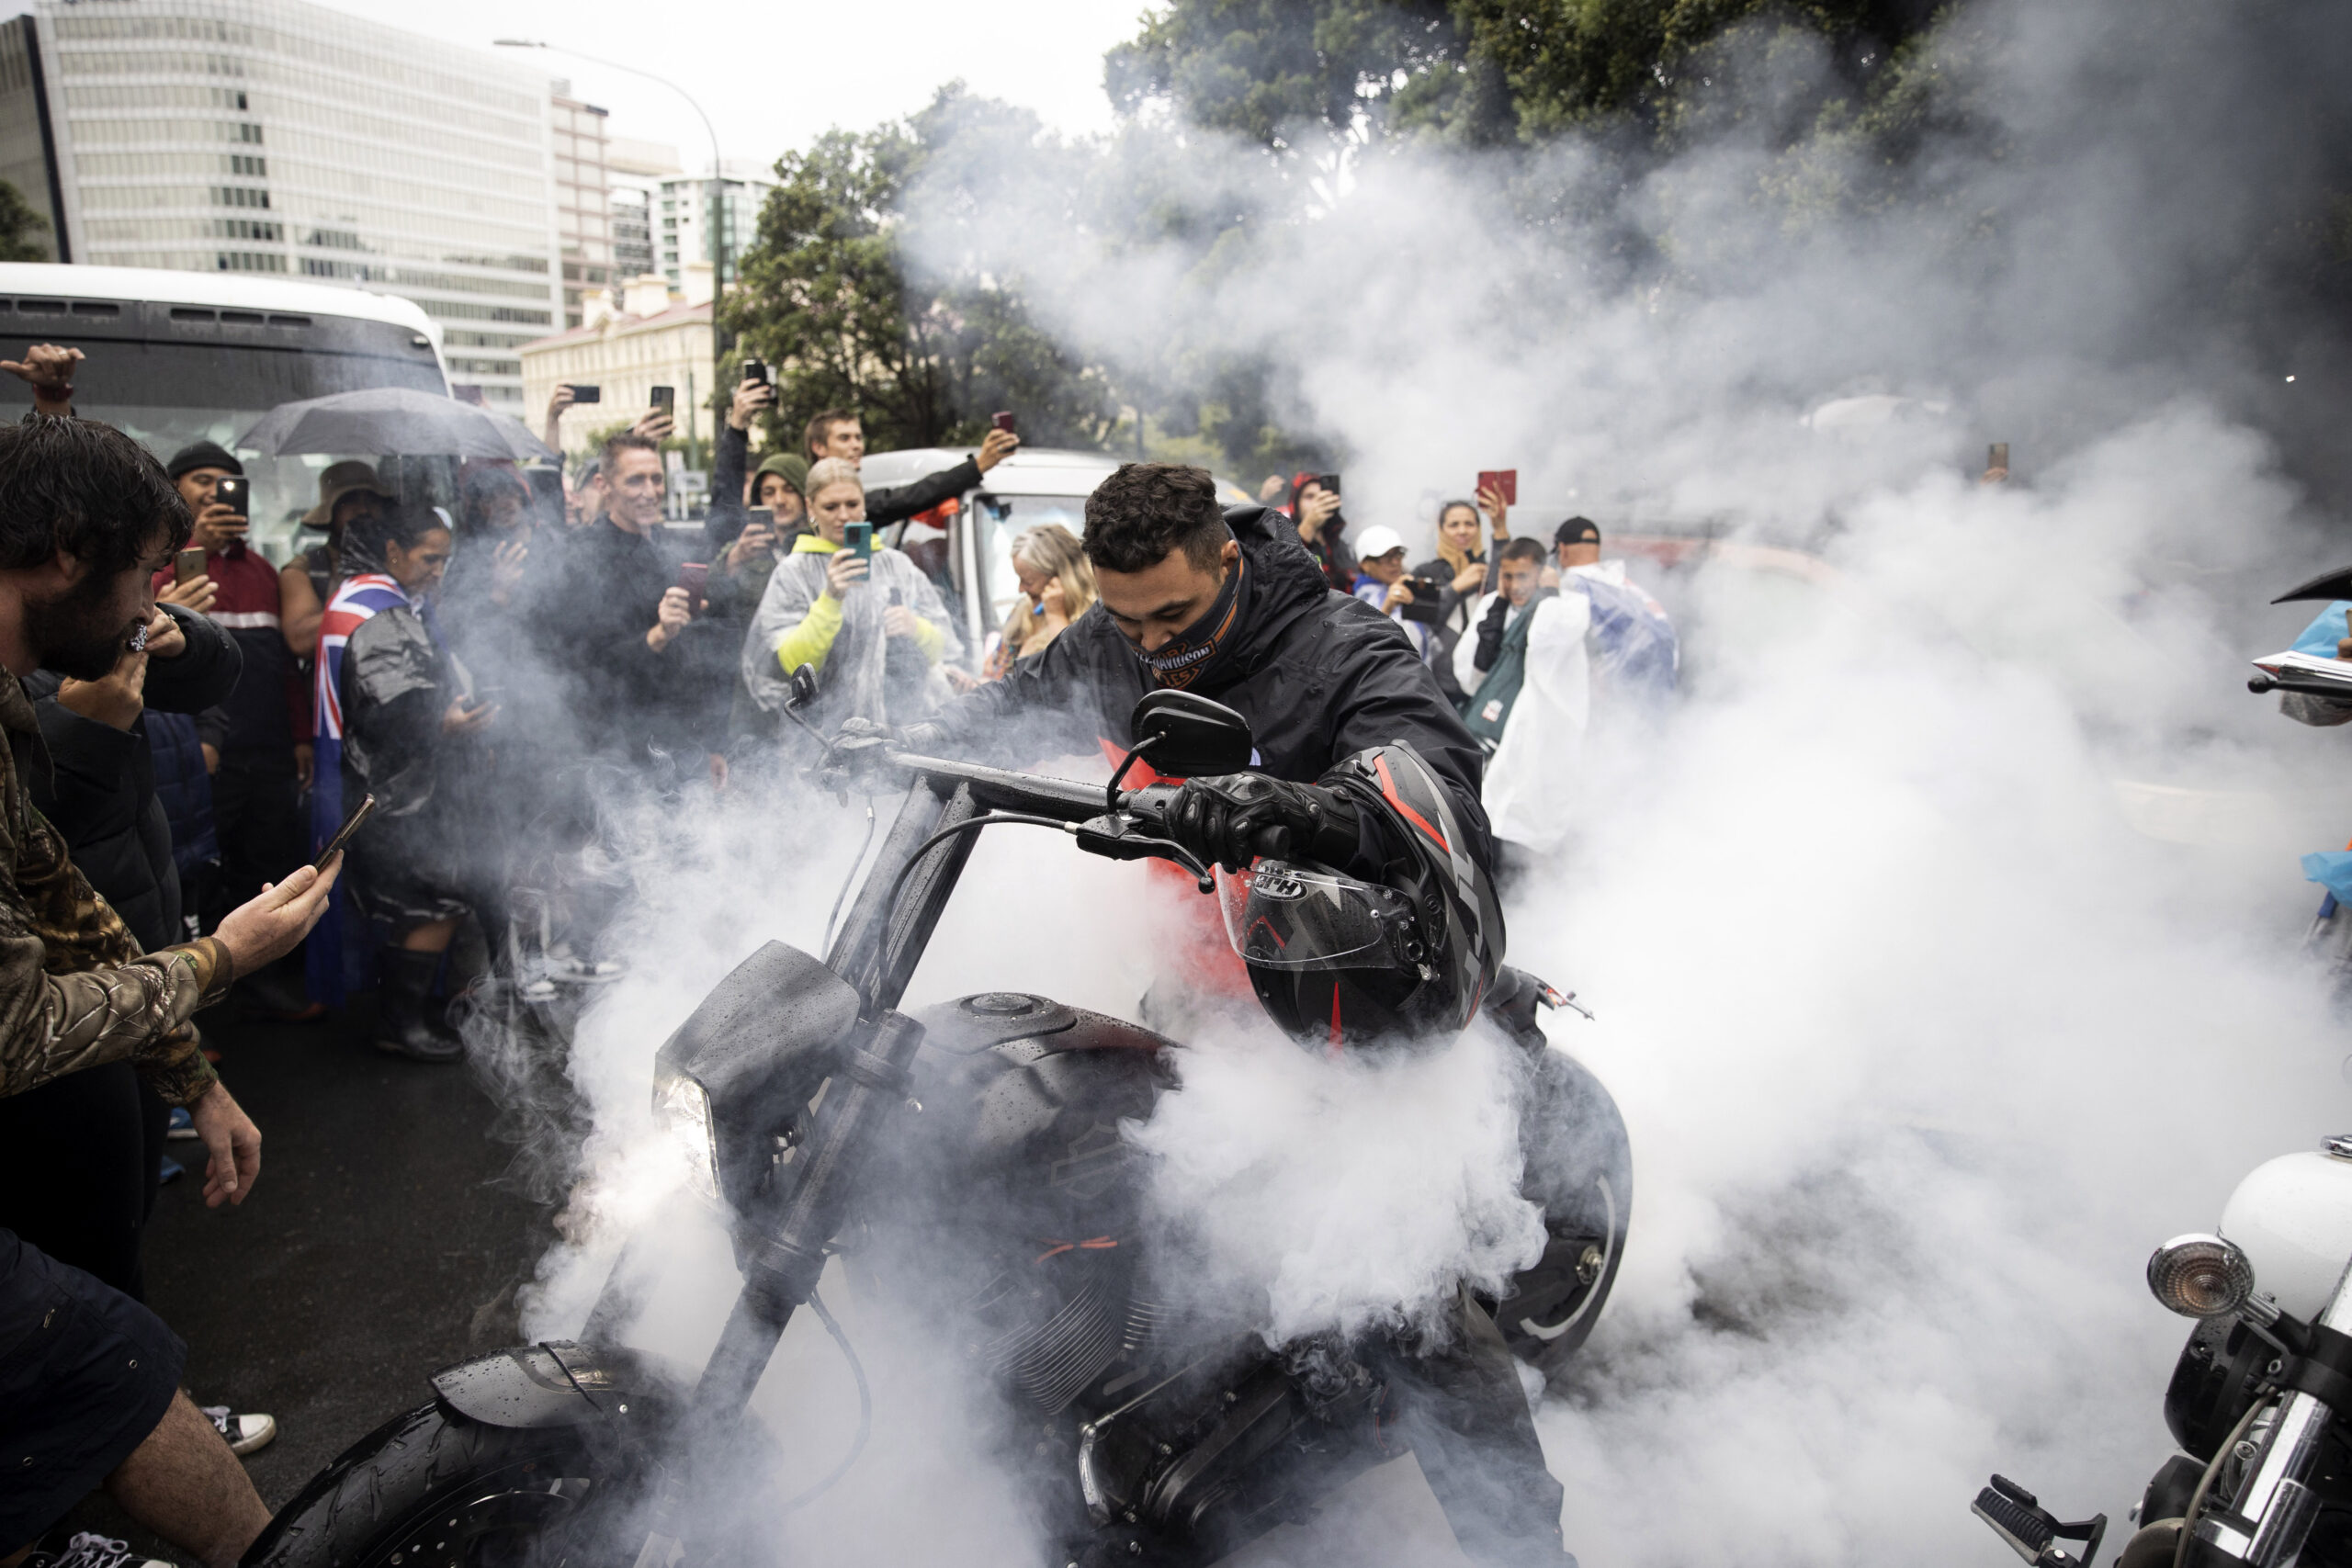 Protesters watch as a man spins the tire on his motorcycle in wet conditions as they demonstrate their opposition to coronavirus vaccine mandates at Parliament in Wellington, New Zealand, Saturday, Feb. 12, 2022. The protest began when a convoy of trucks and cars drove to Parliament from around the nation, inspired by protests in Canada. (George Heard/NZME via AP)